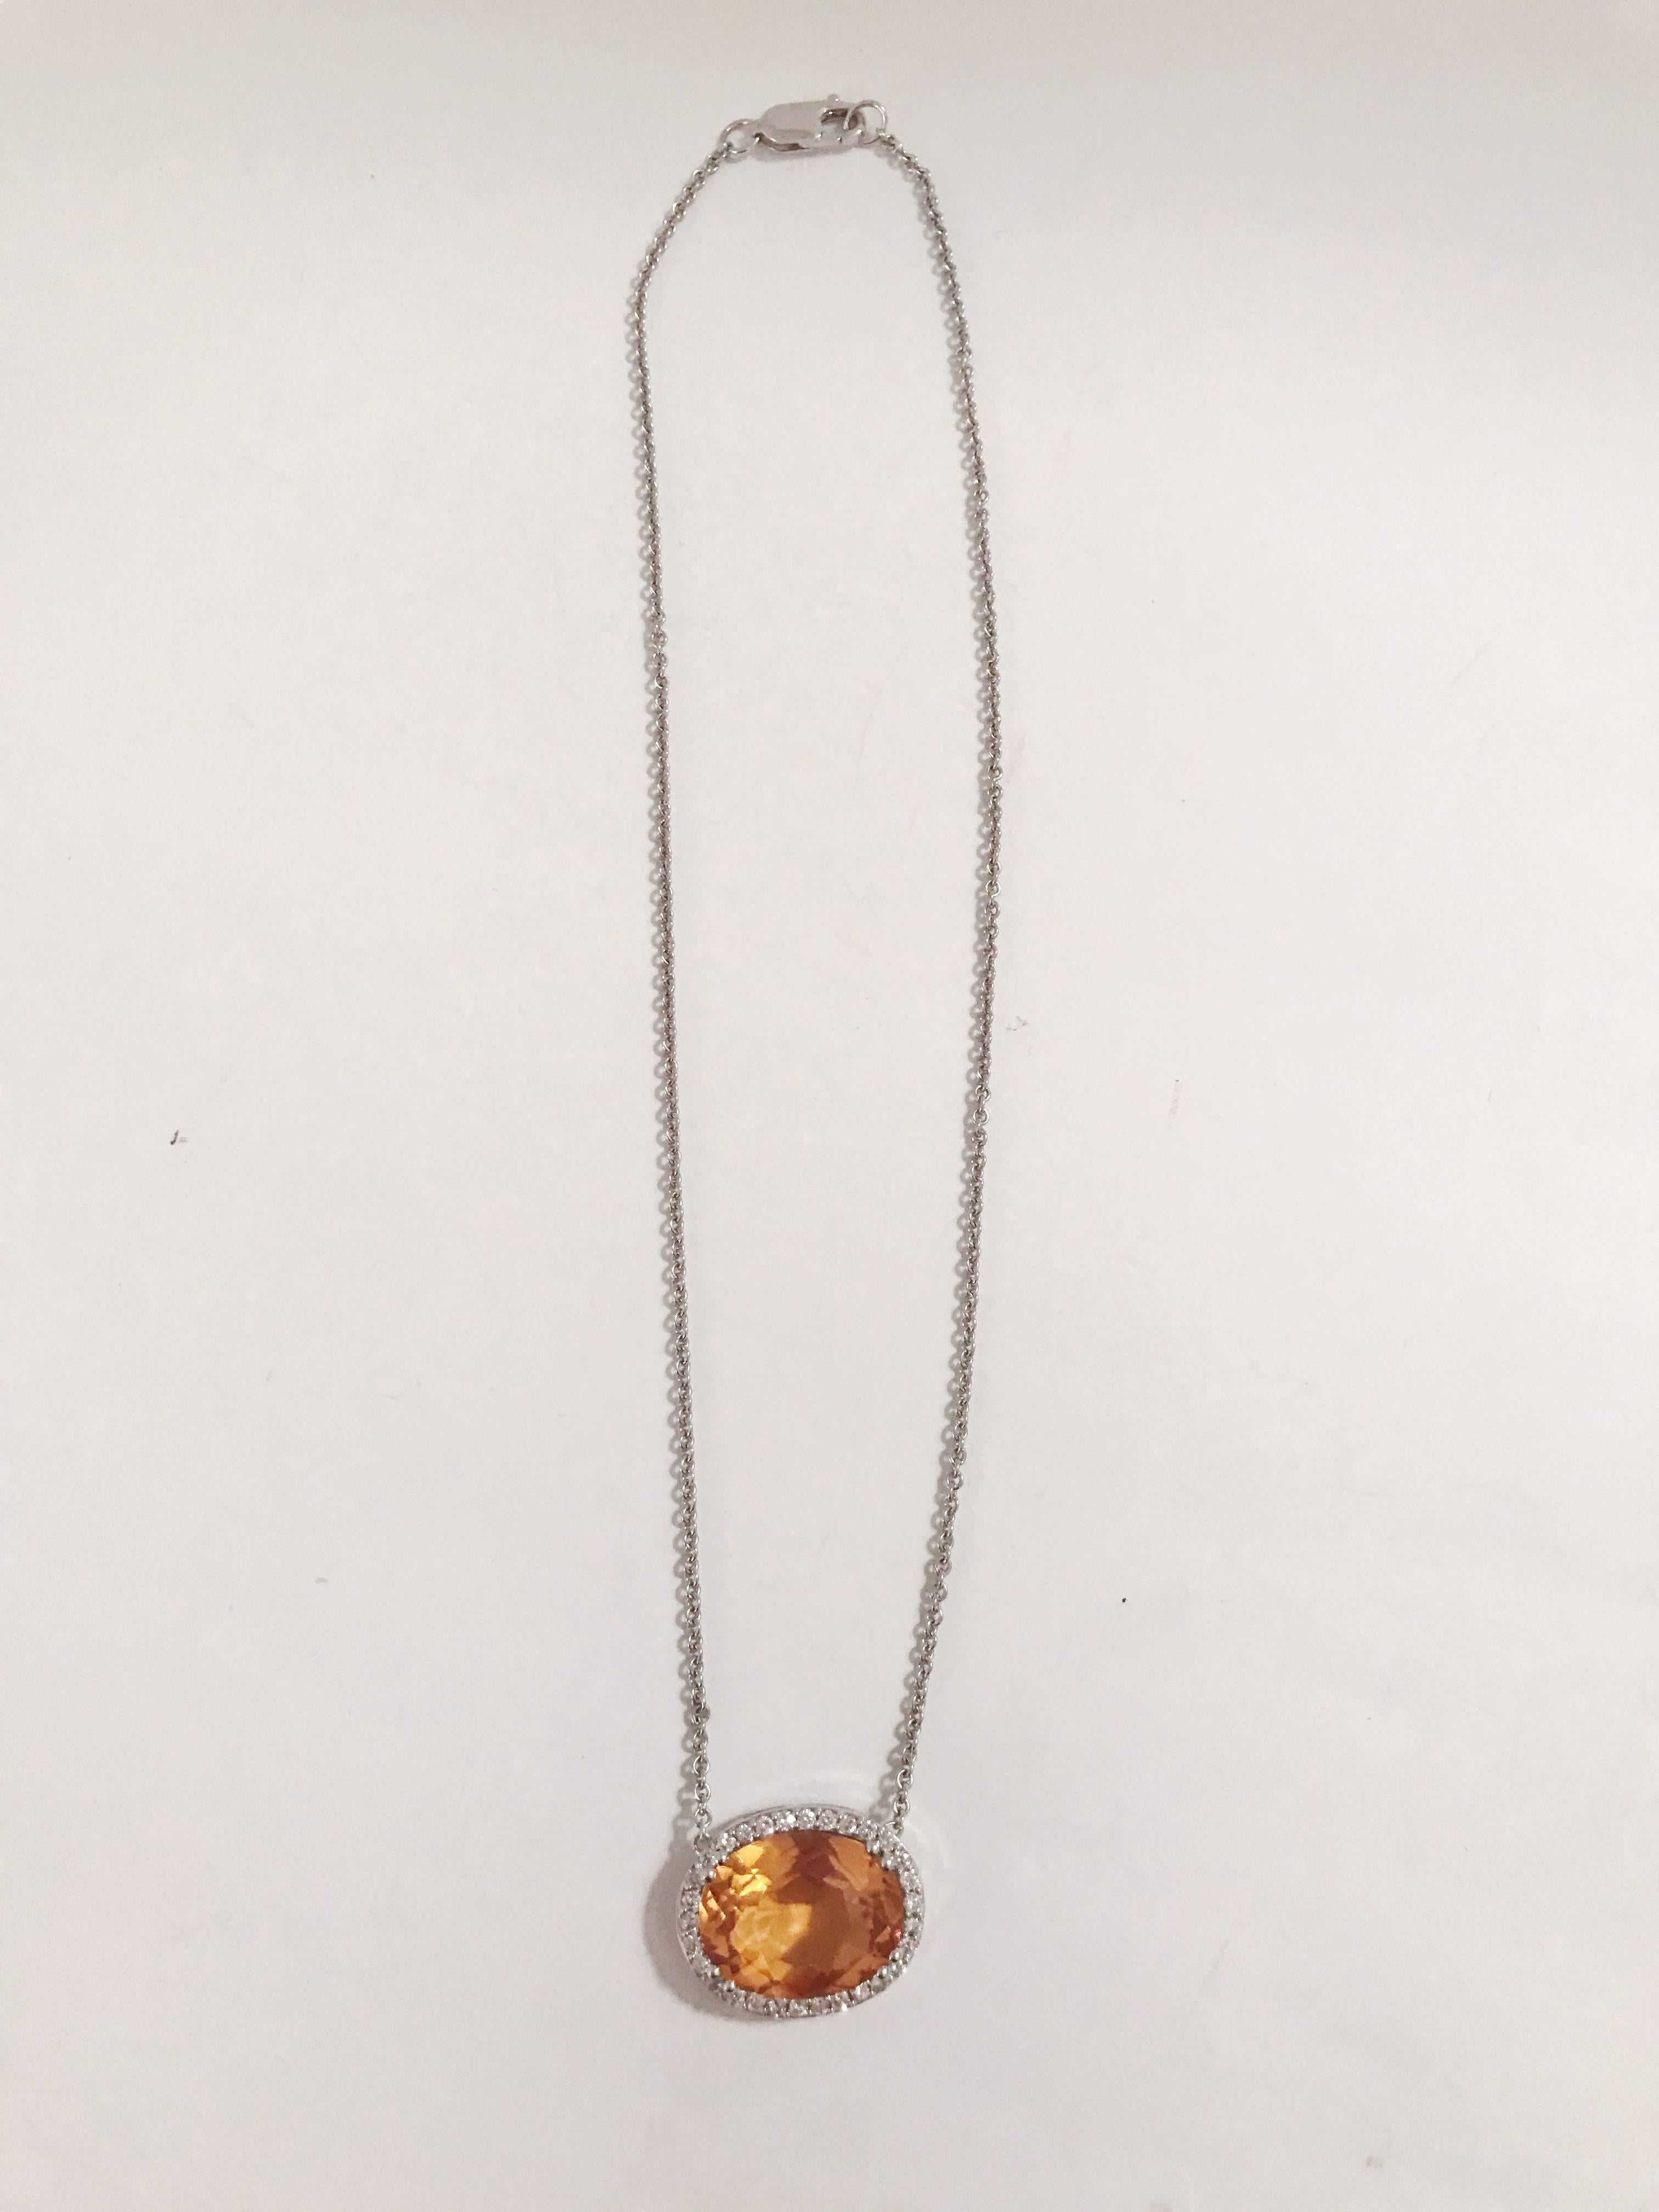 14kt White Gold Deep Citrine Oval Pendant Necklace with Surrounding Diamonds. 

17inch Chain

This Pendant Necklace can be made with any semi precious stone

Please let me know if you have any questions

Best,
Christina